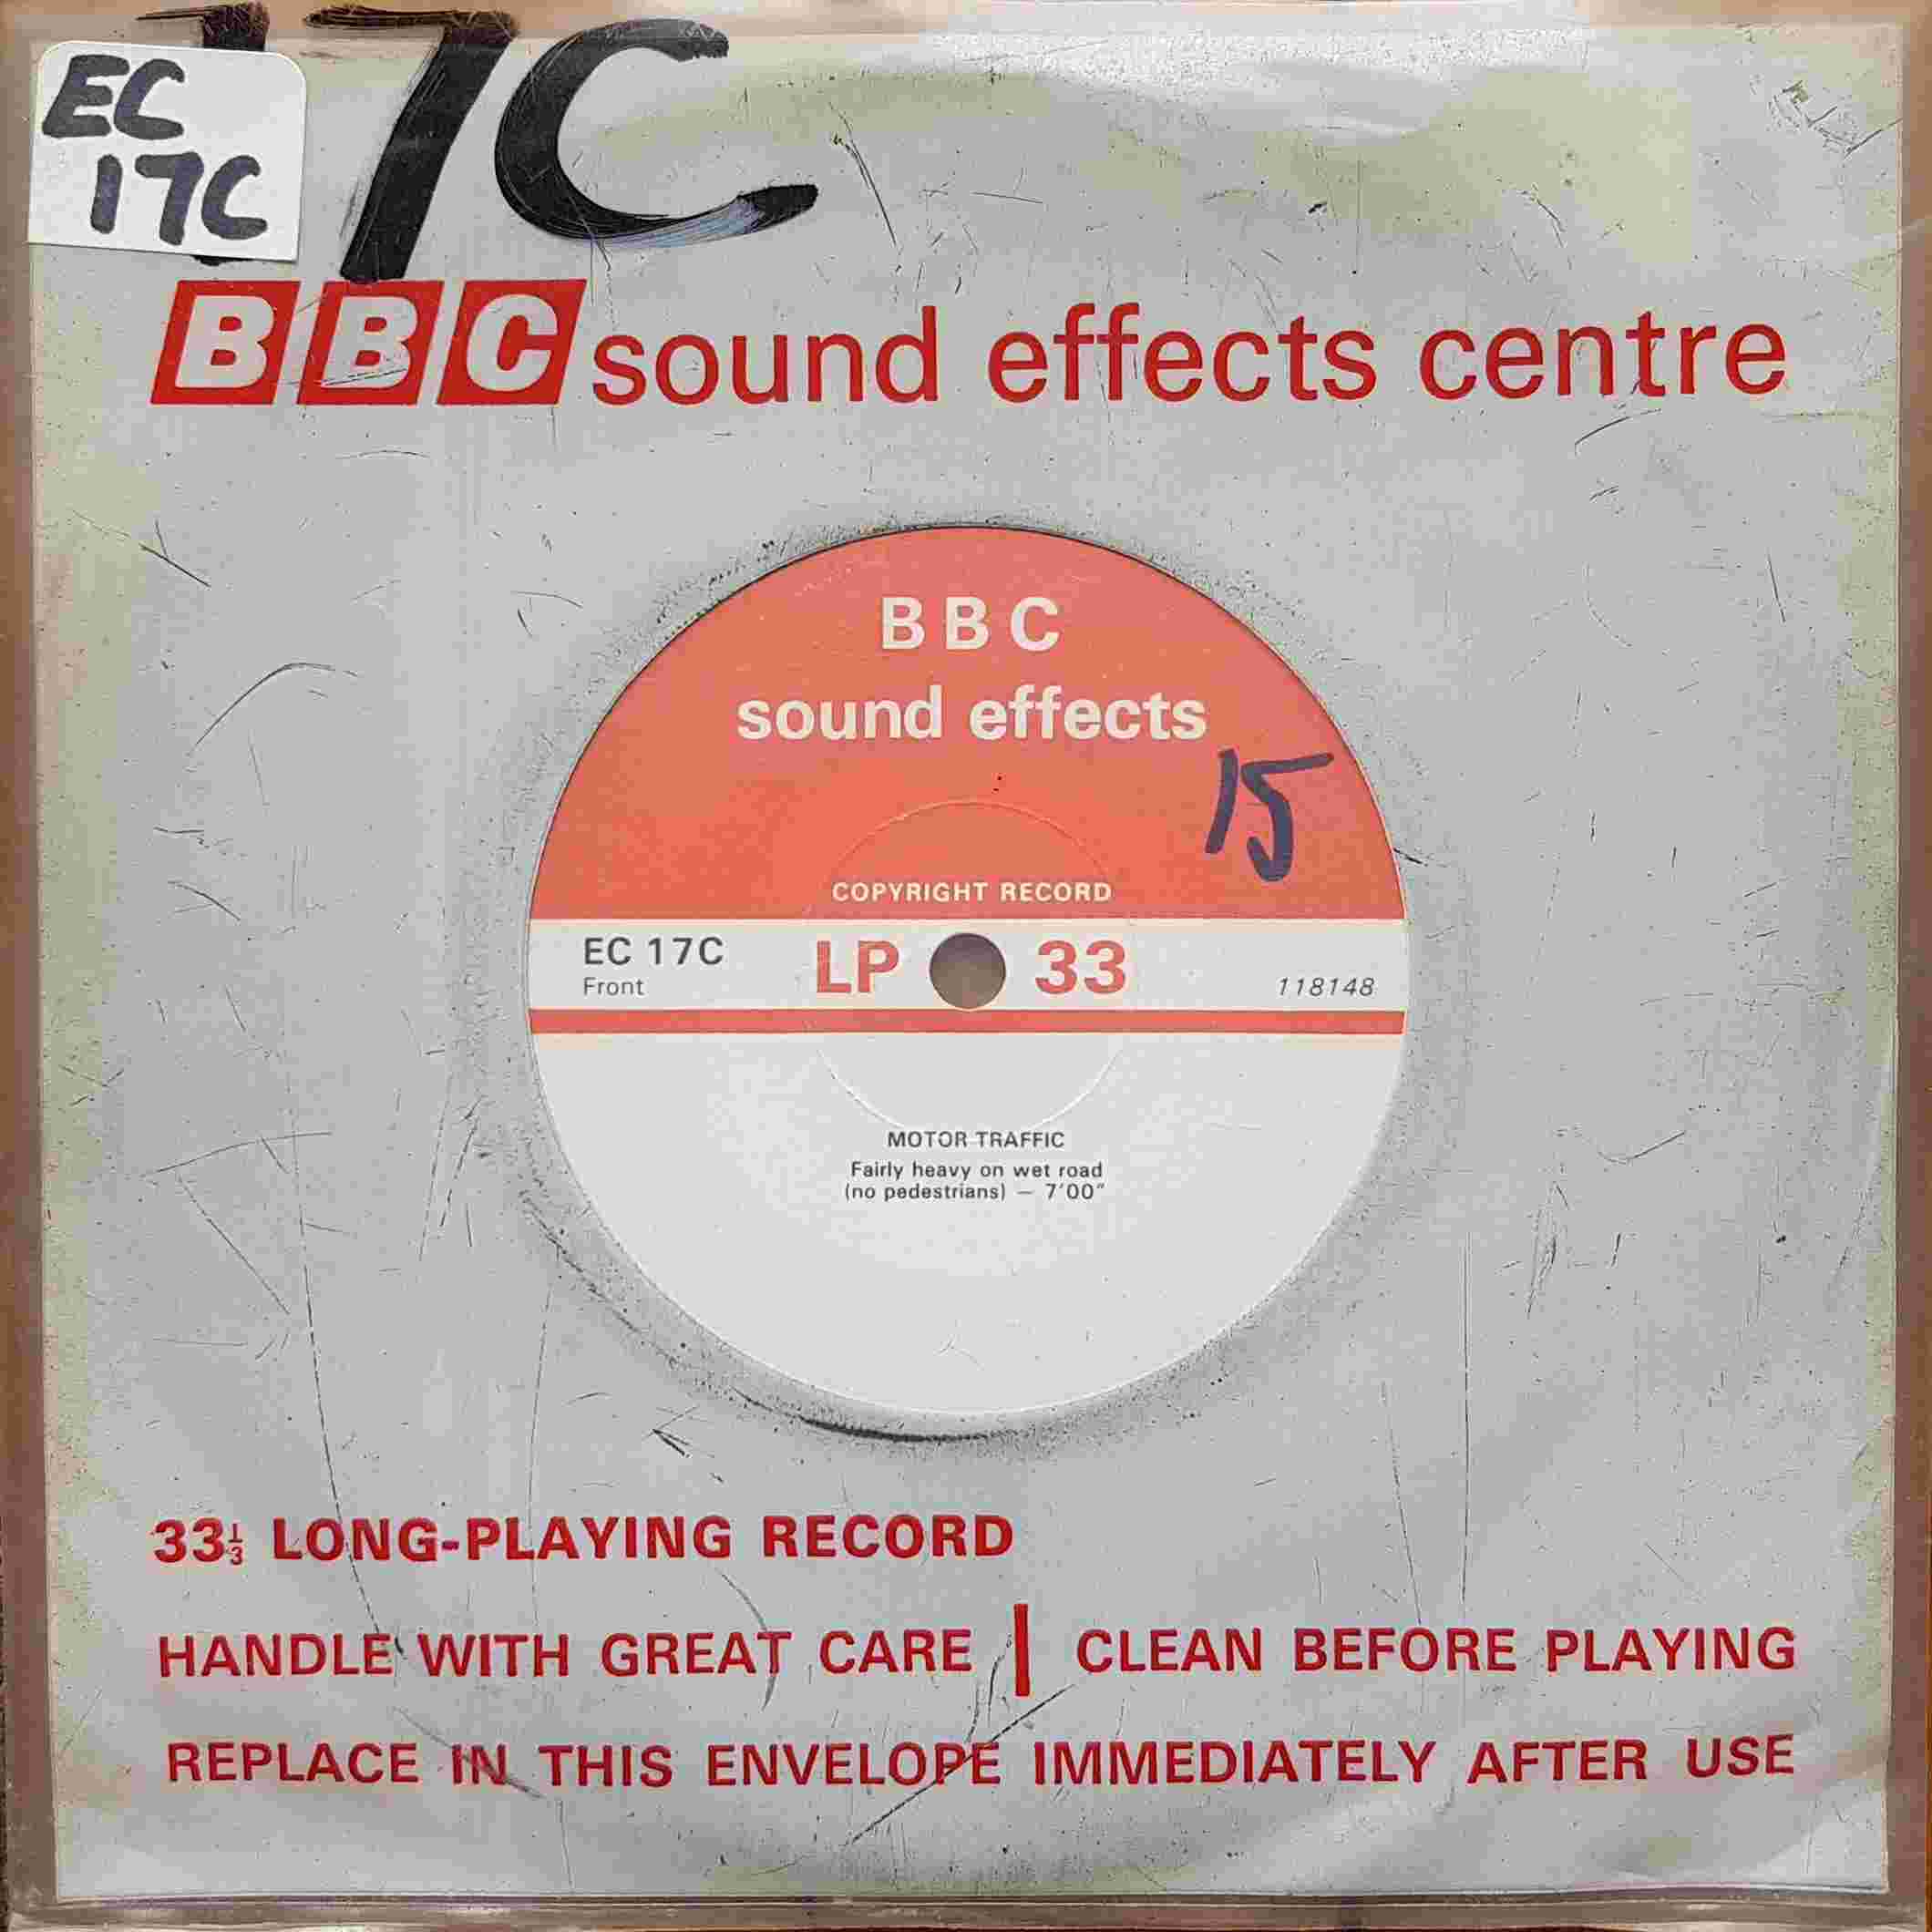 Picture of EC 17C Motor traffic by artist Not registered from the BBC records and Tapes library